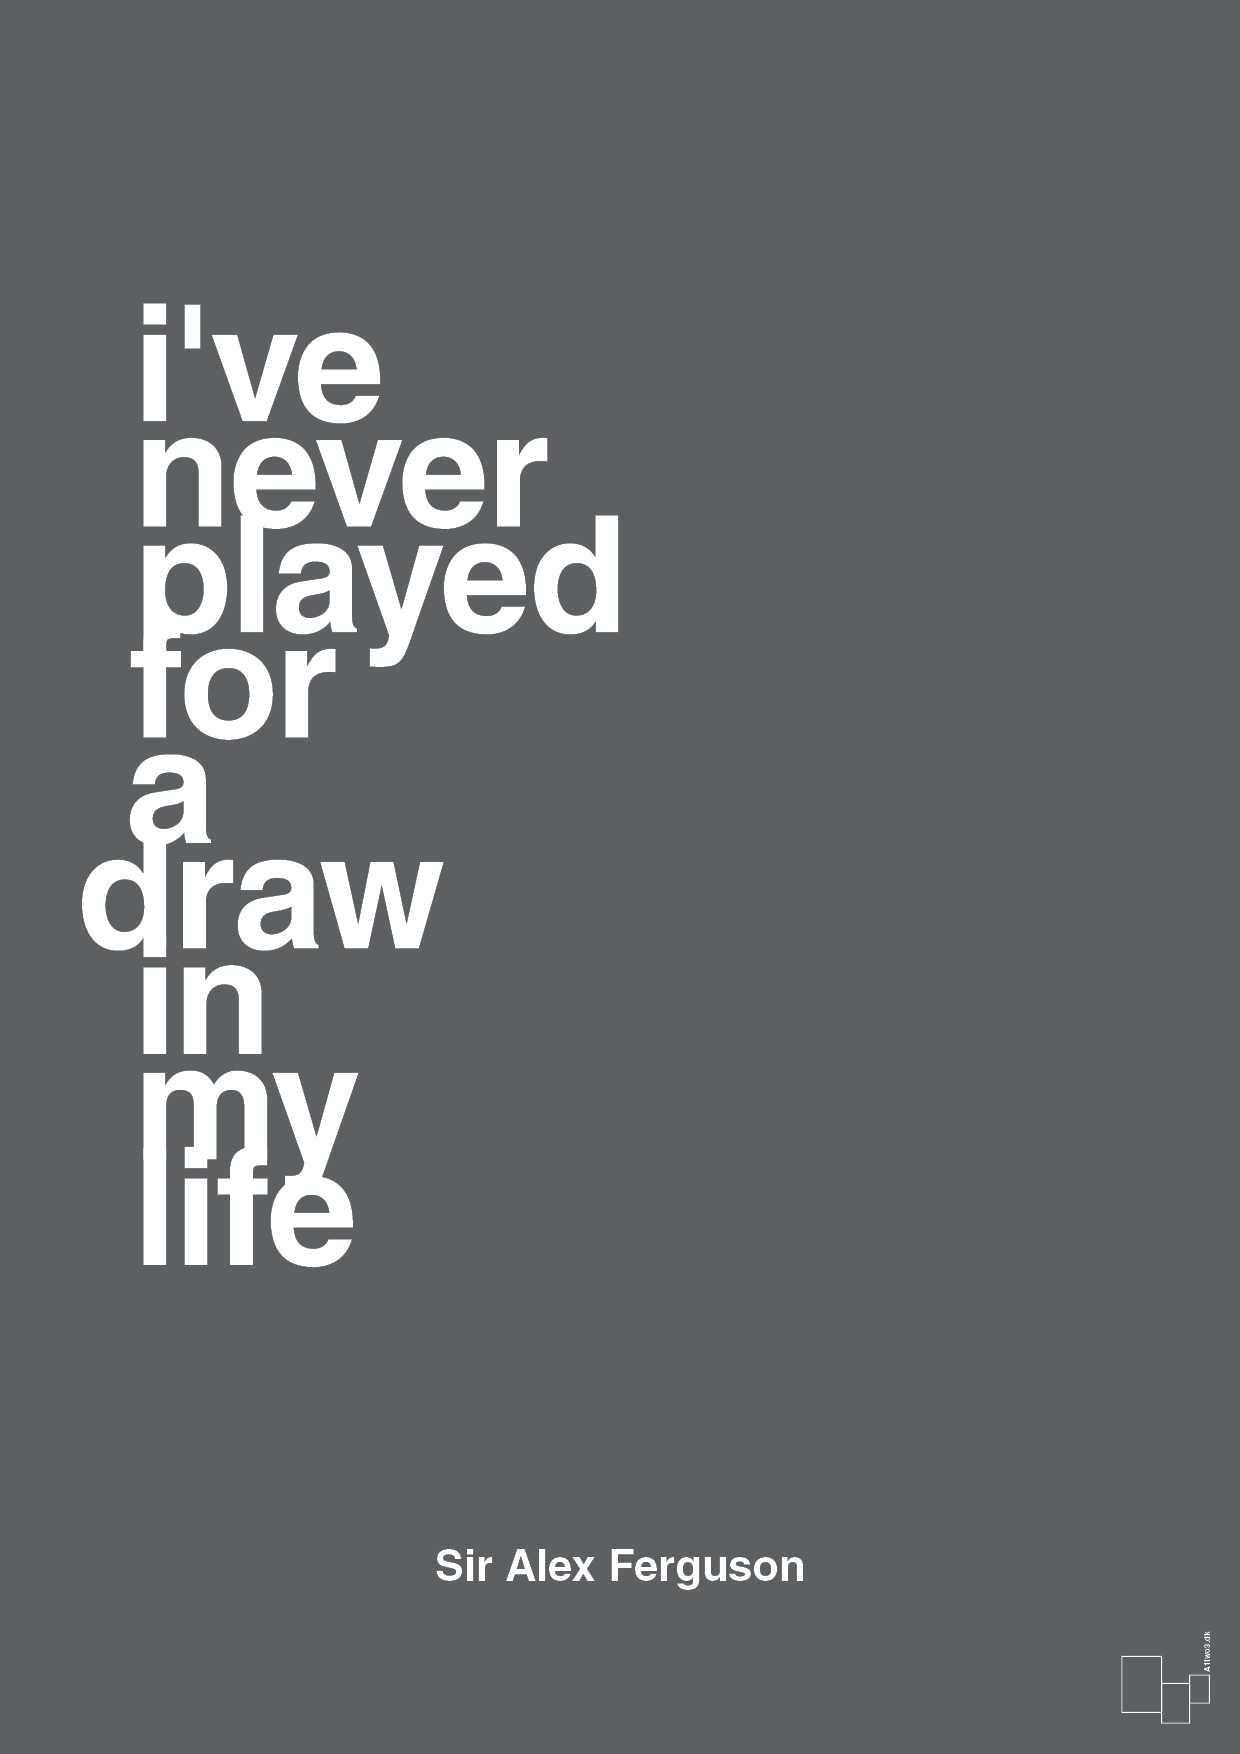 i've never played for a draw in my life - Plakat med Citater i Graphic Charcoal